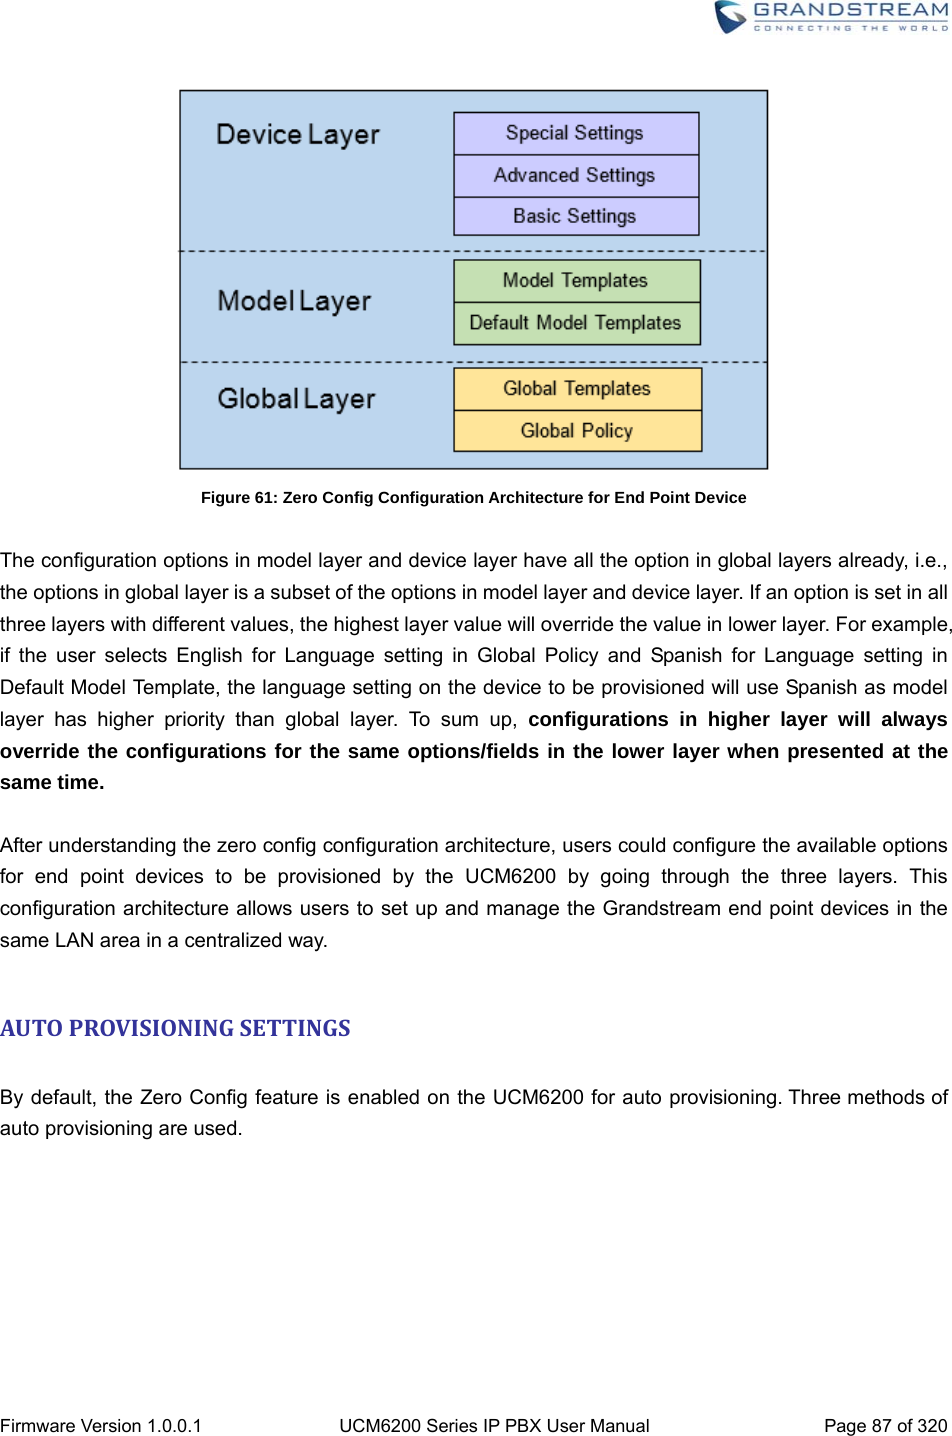  Firmware Version 1.0.0.1  UCM6200 Series IP PBX User Manual  Page 87 of 320  Figure 61: Zero Config Configuration Architecture for End Point Device  The configuration options in model layer and device layer have all the option in global layers already, i.e., the options in global layer is a subset of the options in model layer and device layer. If an option is set in all three layers with different values, the highest layer value will override the value in lower layer. For example, if the user selects English for Language setting in Global Policy and Spanish for Language setting in Default Model Template, the language setting on the device to be provisioned will use Spanish as model layer has higher priority than global layer. To sum up, configurations in higher layer will always override the configurations for the same options/fields in the lower layer when presented at the same time.  After understanding the zero config configuration architecture, users could configure the available options for end point devices to be provisioned by the UCM6200 by going through the three layers. This configuration architecture allows users to set up and manage the Grandstream end point devices in the same LAN area in a centralized way.  AUTOPROVISIONINGSETTINGS By default, the Zero Config feature is enabled on the UCM6200 for auto provisioning. Three methods of auto provisioning are used. 